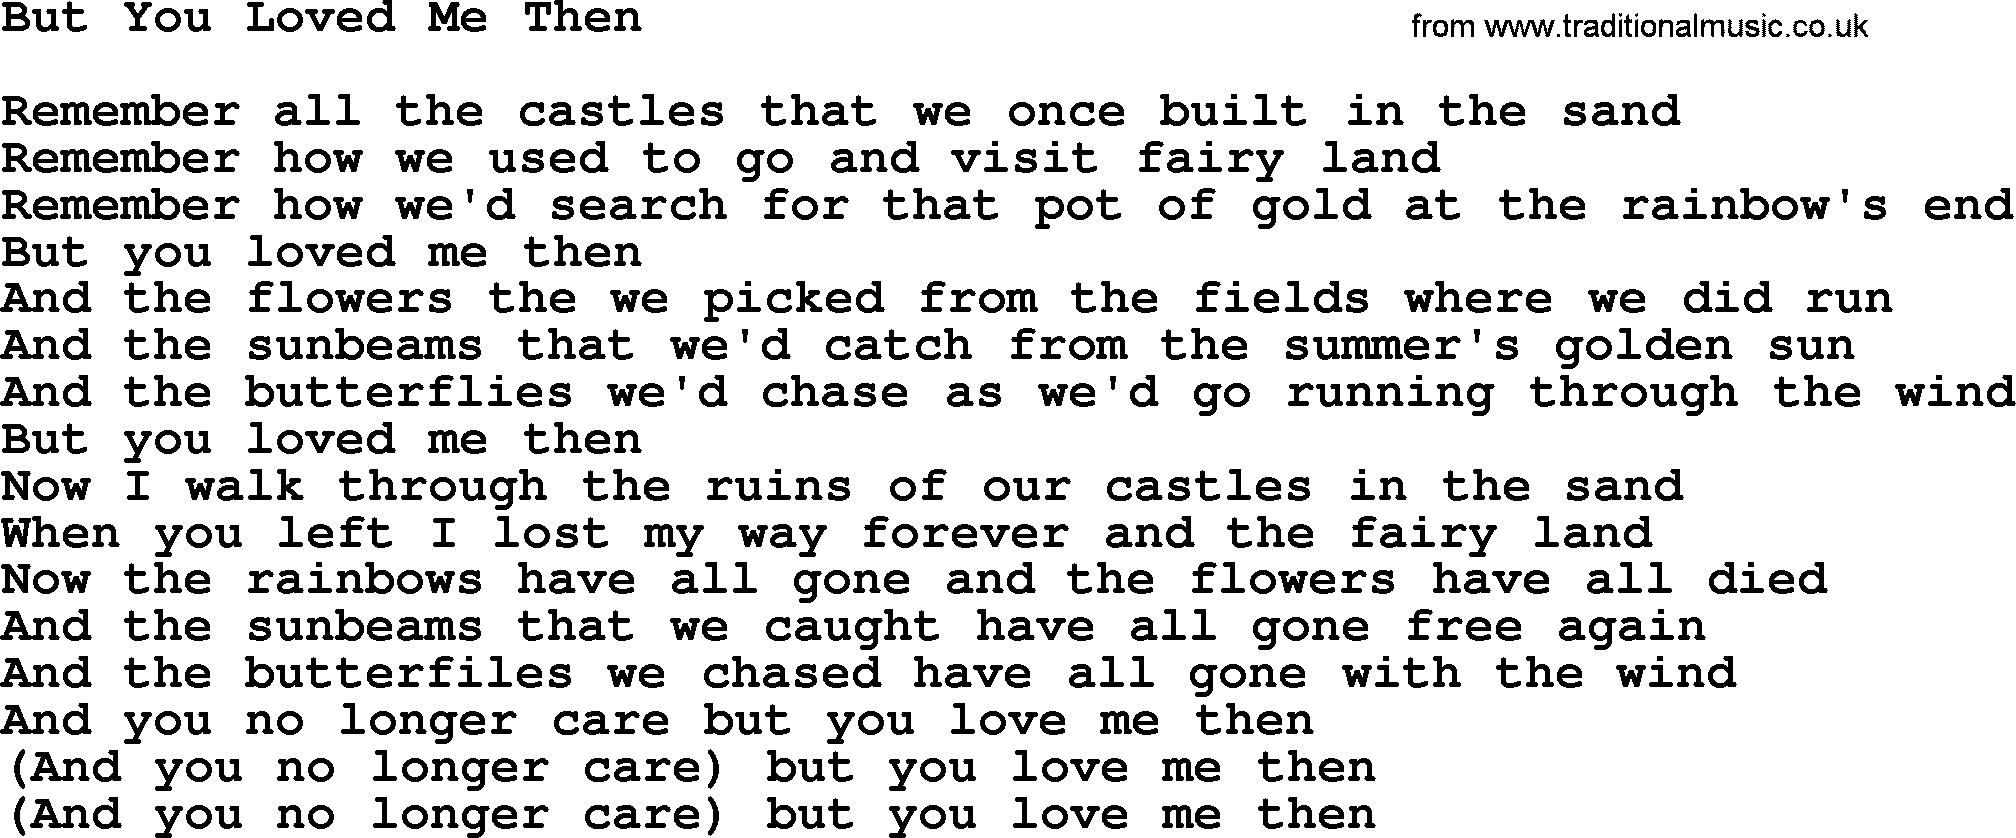 Dolly Parton song But You Loved Me Then.txt lyrics